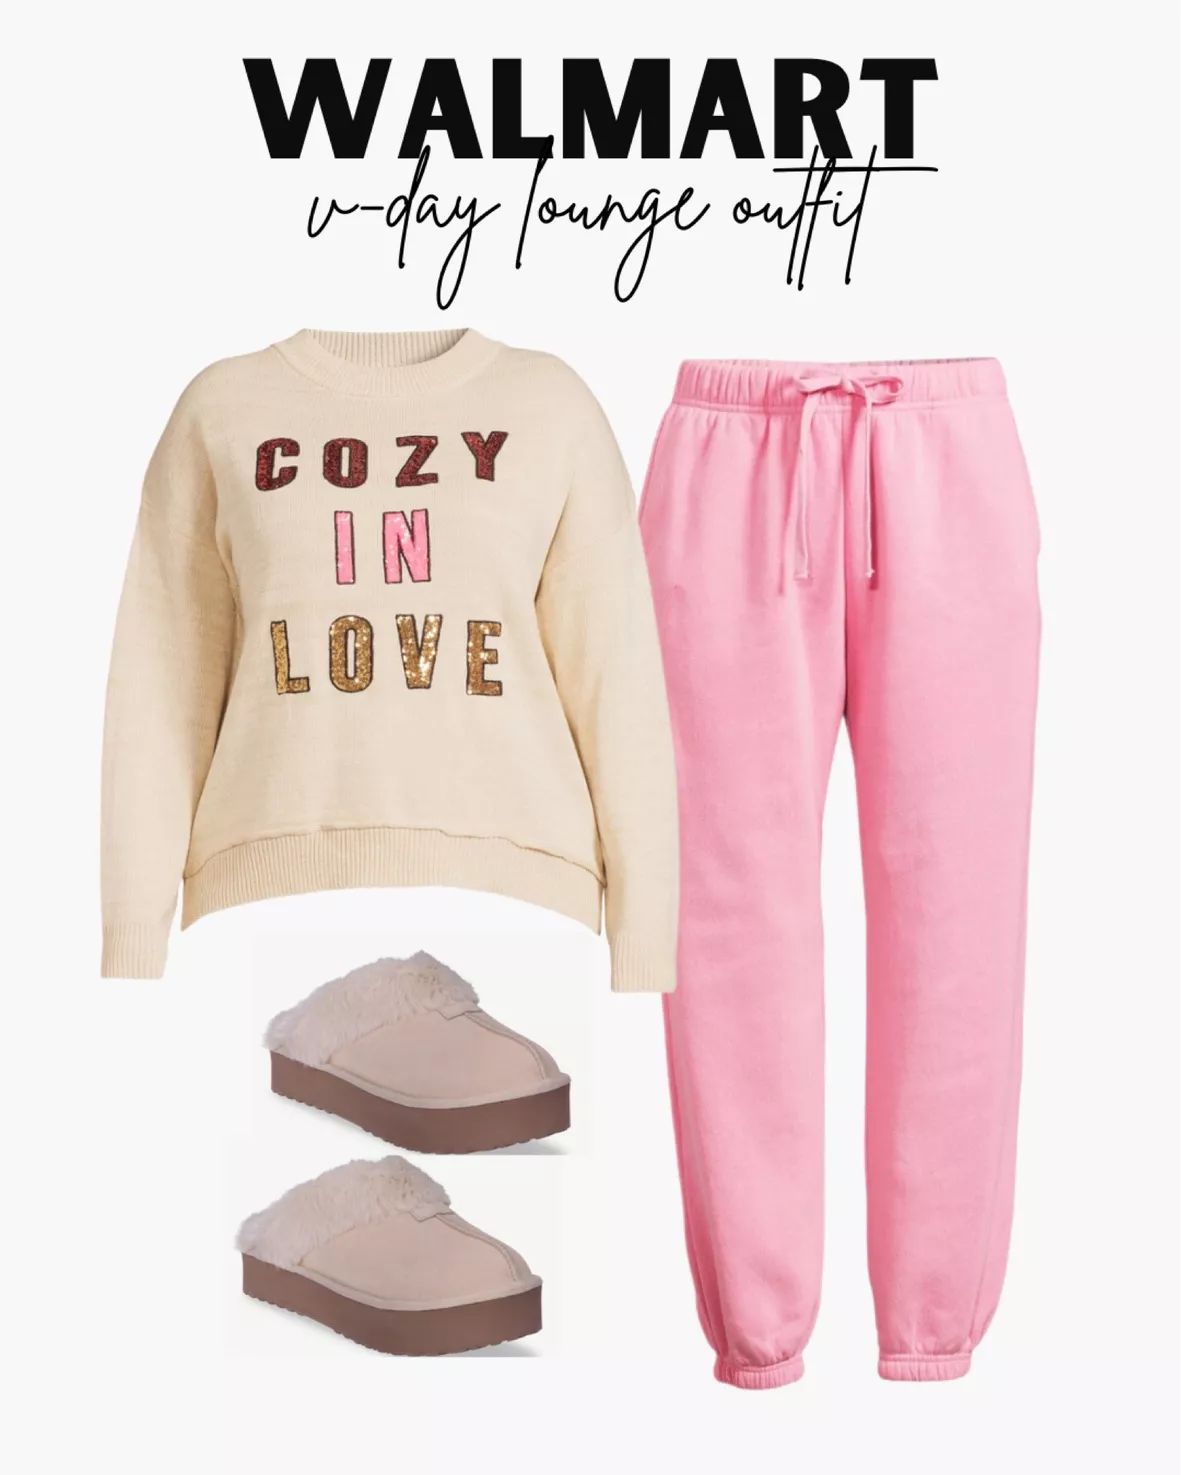 PINK Zip up sweater and flare tracksuit set, Loungewear